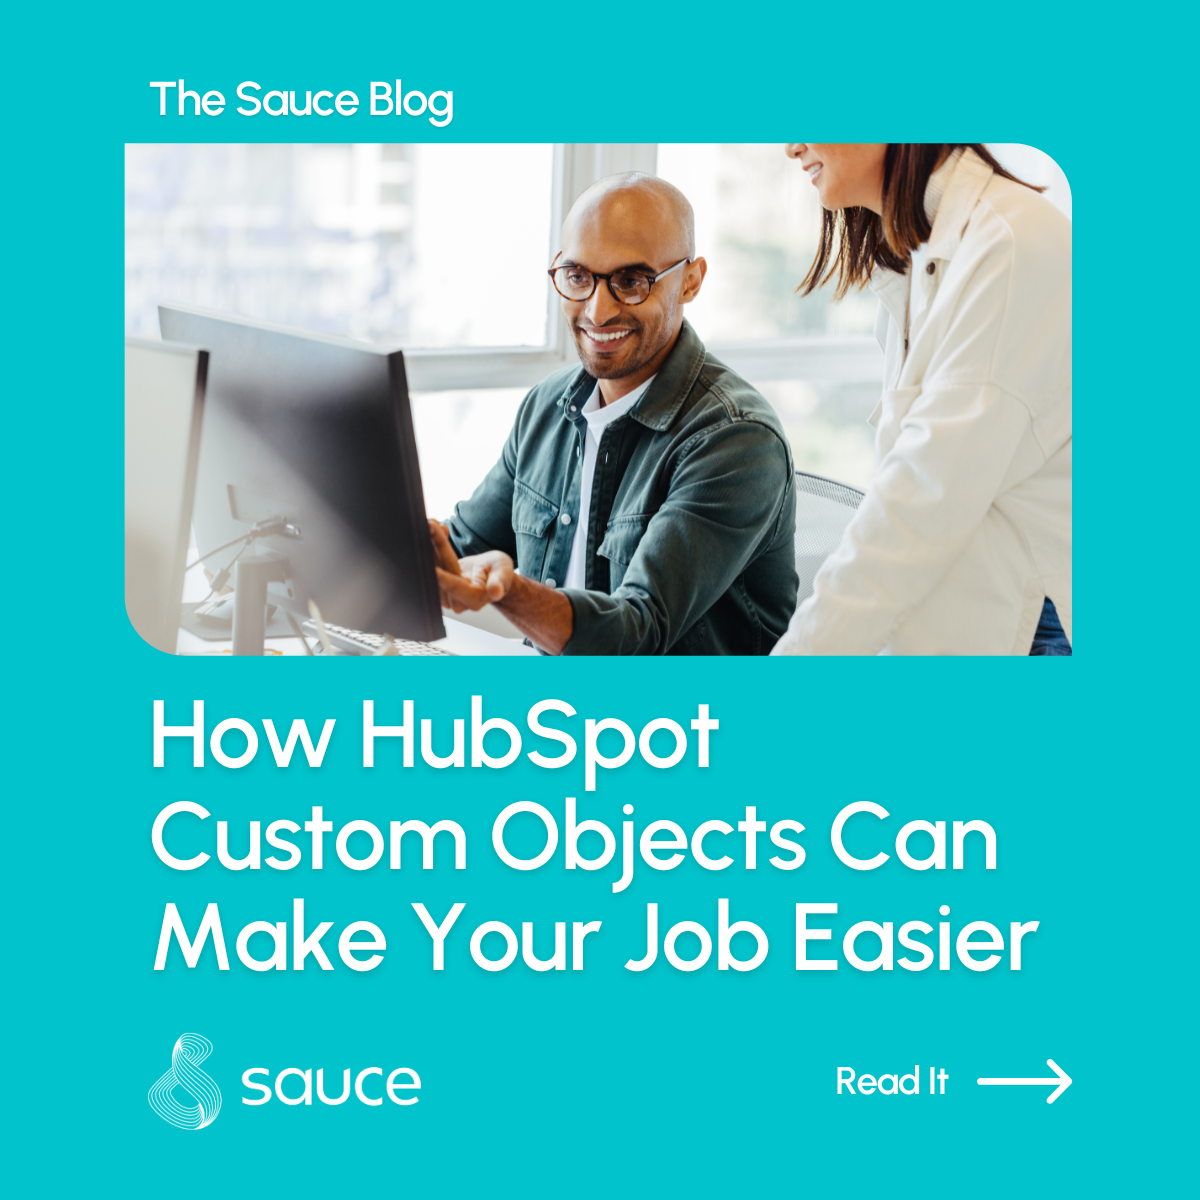 How HubSpot Custom Objects Can Make Your Job Easier